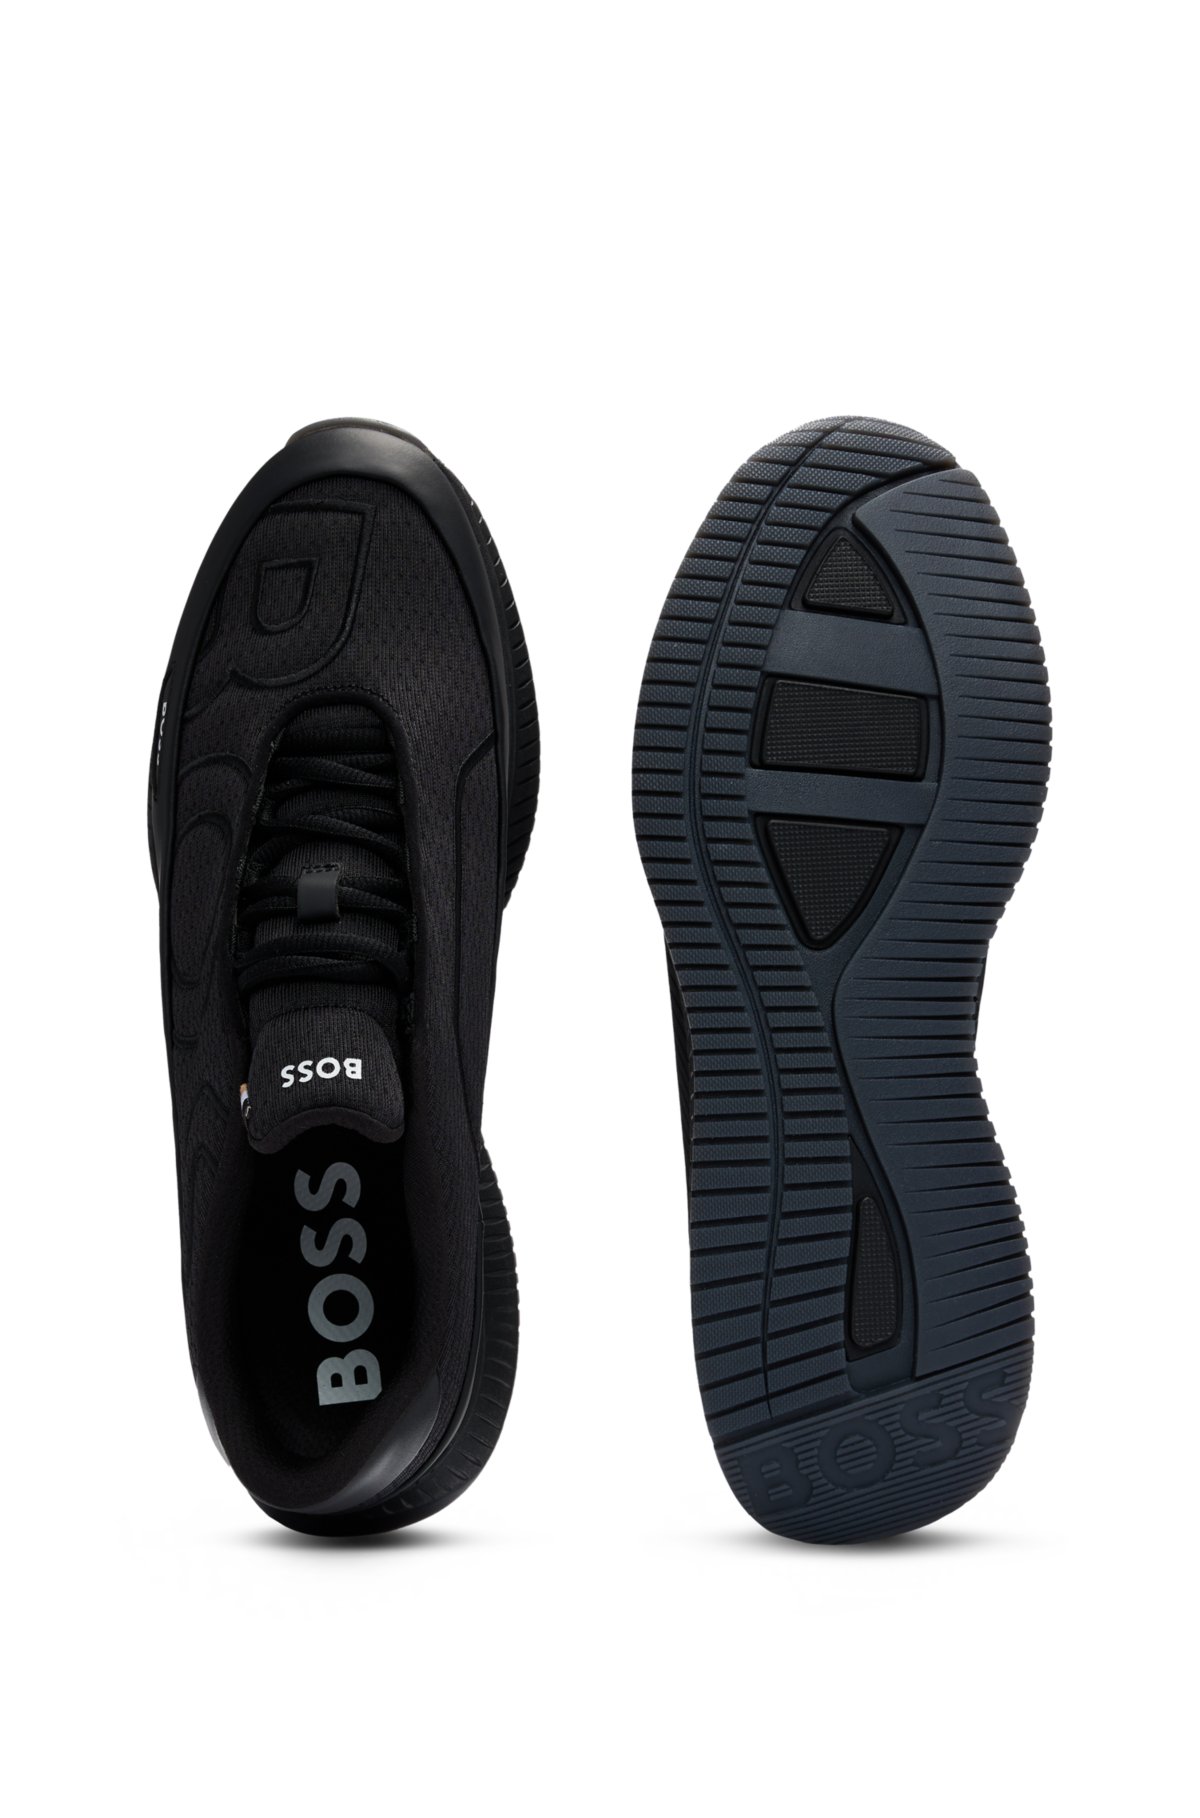 BOSS - TTNM EVO embroidered-logo trainers with rubberised faux leather